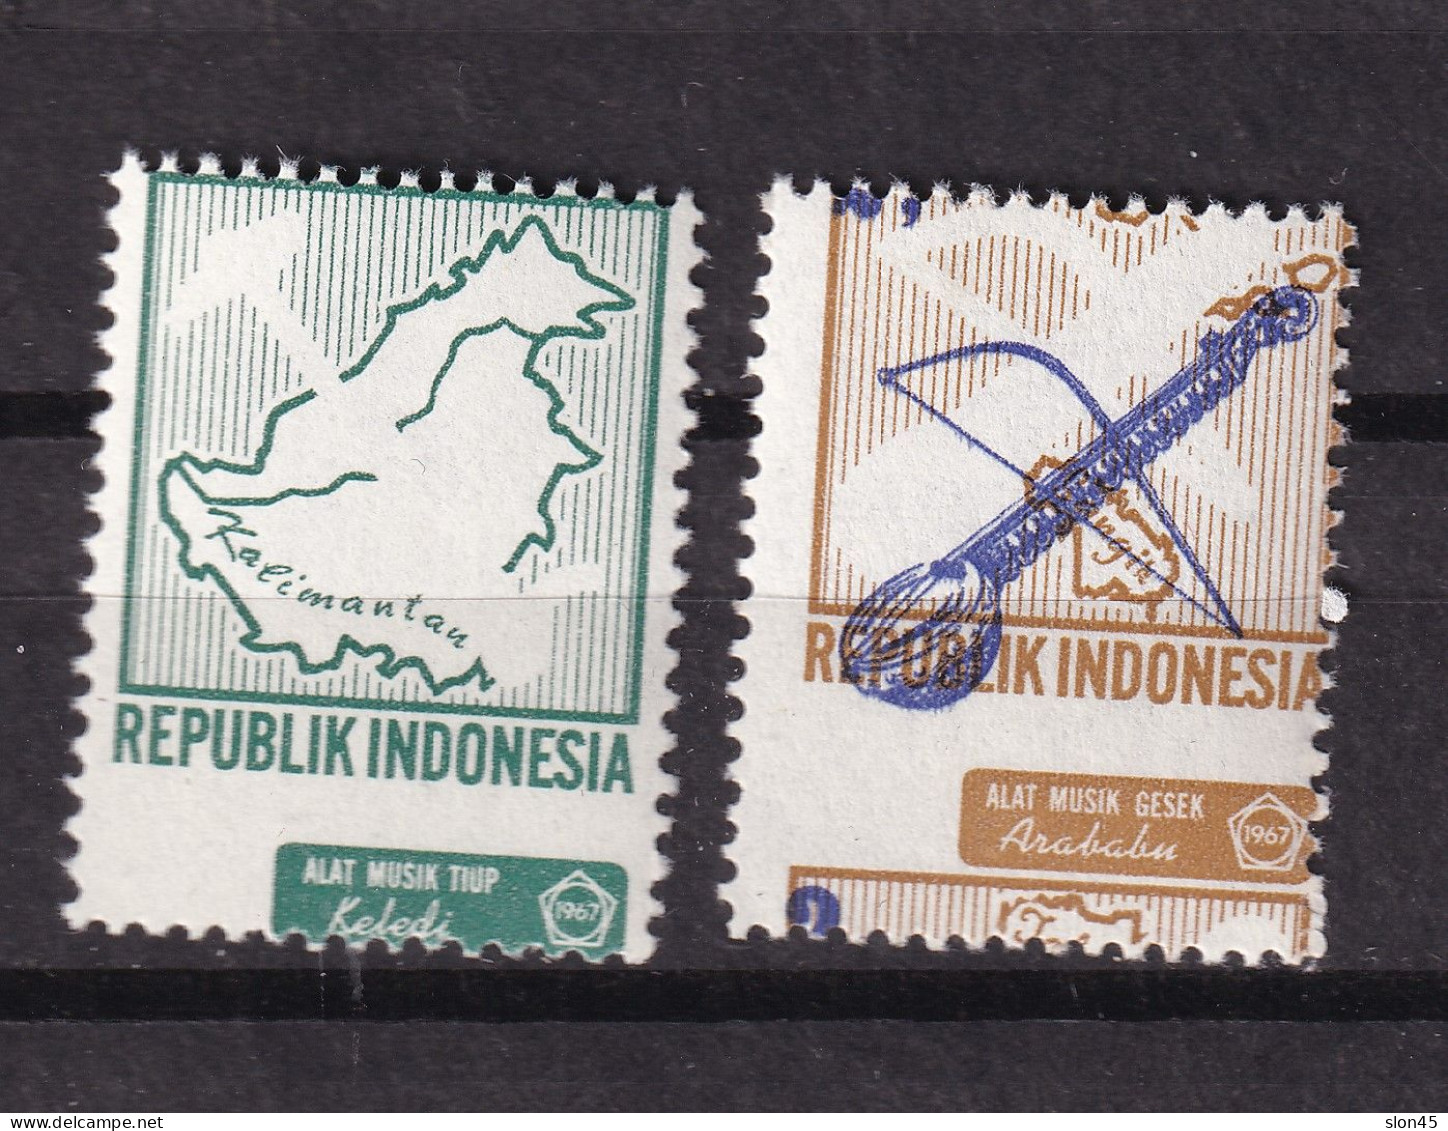 Indonesia 1969 Imperf Proofs MNH 15456 - Oddities On Stamps